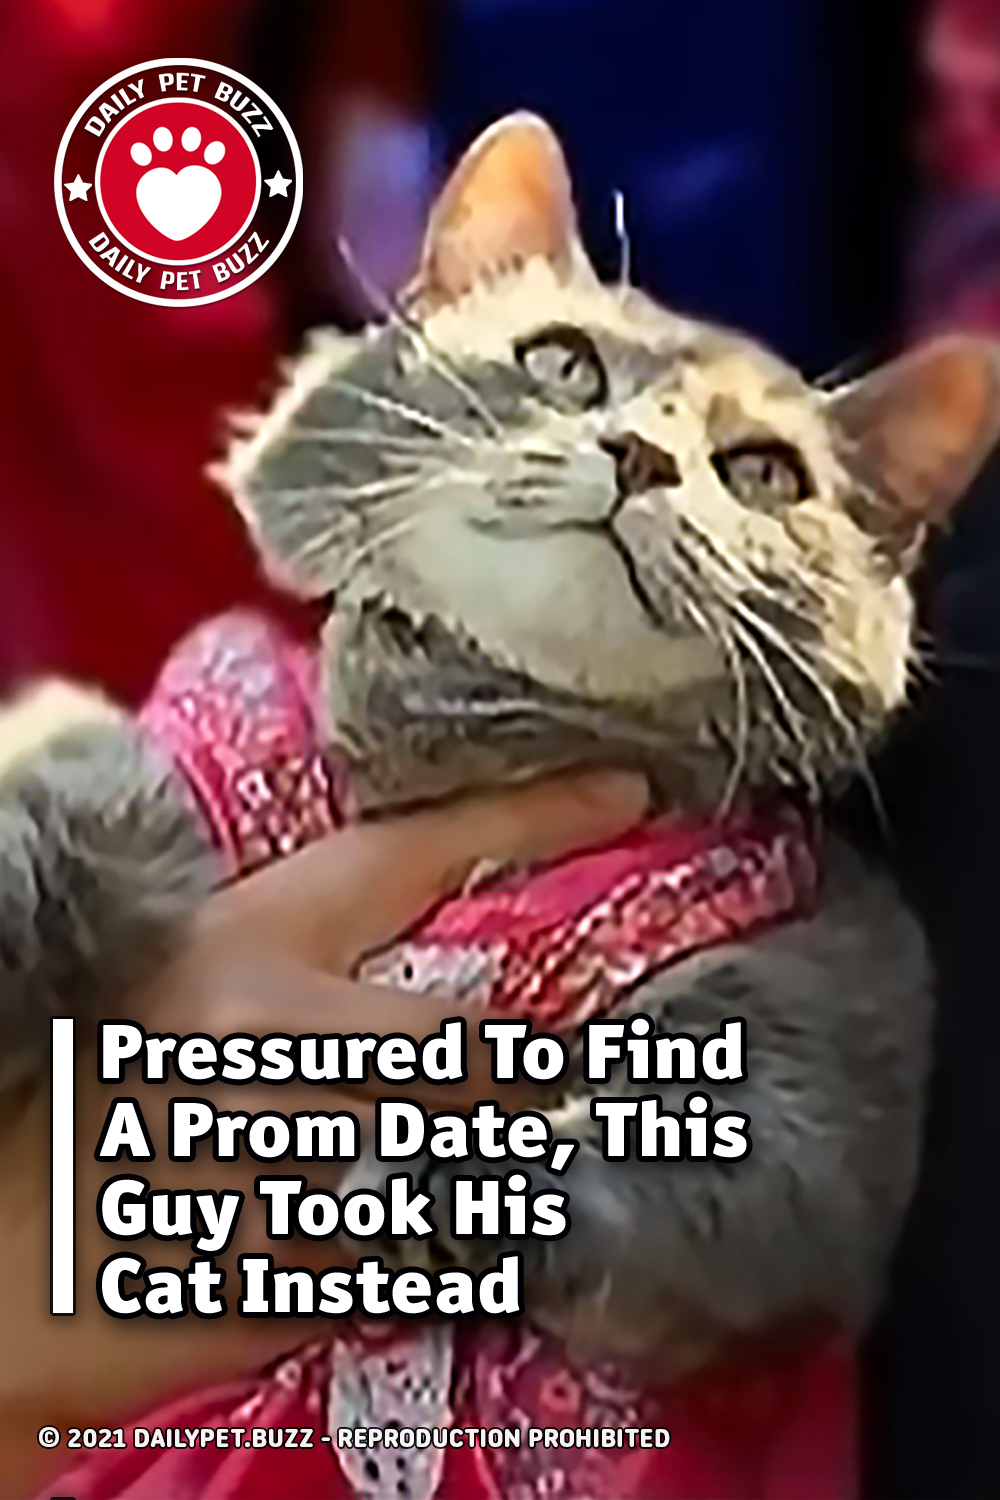 Pressured To Find A Prom Date, This Guy Took His Cat Instead